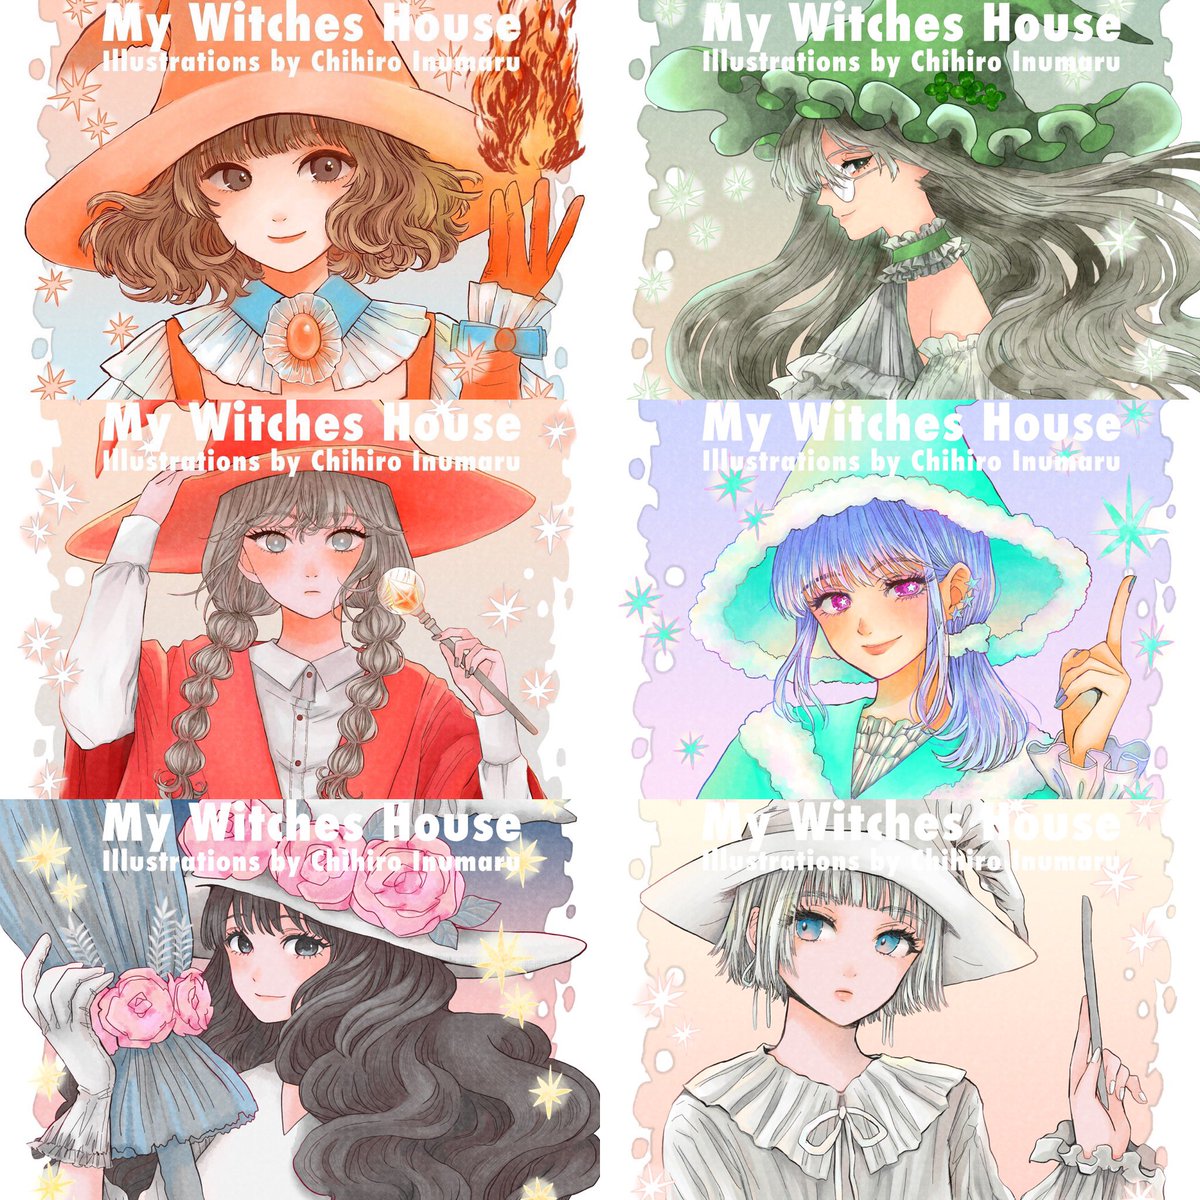 NFTコレクション▼
#MyWitchesHouse
魔女たち一覧▼
#MWHCharacters
10人記念 魔女のフリー壁紙▼
https://t.co/bjdwuiYxdN

「日陰のシャイが明日を愛する方法」
ちみし名義 Web漫画Kindle版▼
https://t.co/oXFF1DuEC3

通販(BOOTH)
原画、イラスト集、グッズ▼
https://t.co/2zL3s5T3h6 